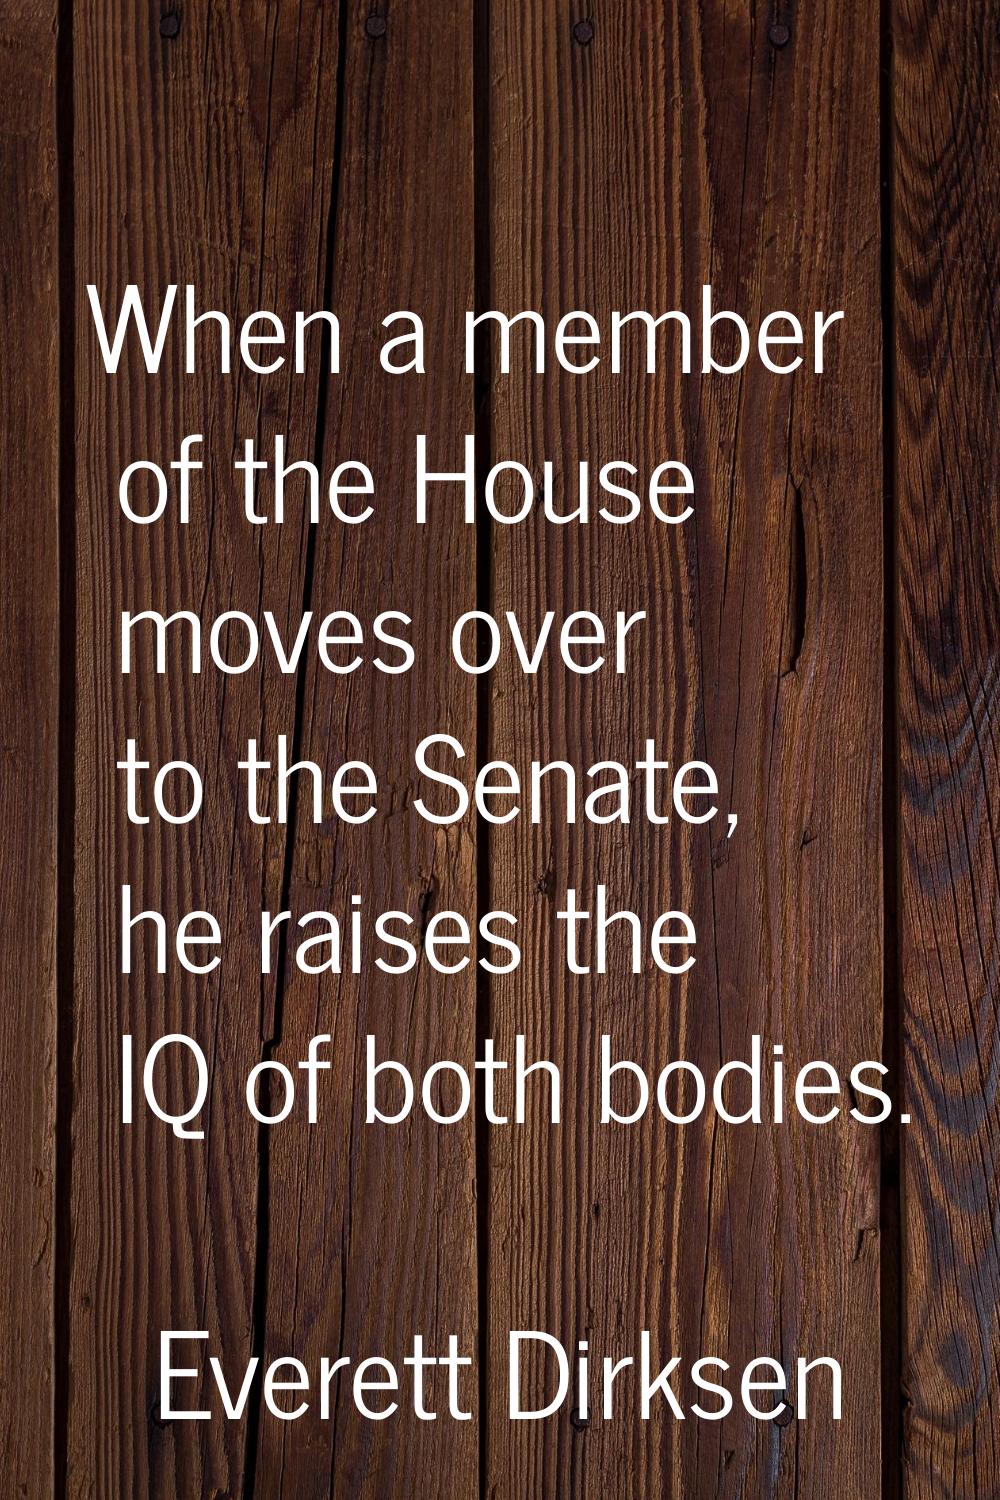 When a member of the House moves over to the Senate, he raises the IQ of both bodies.